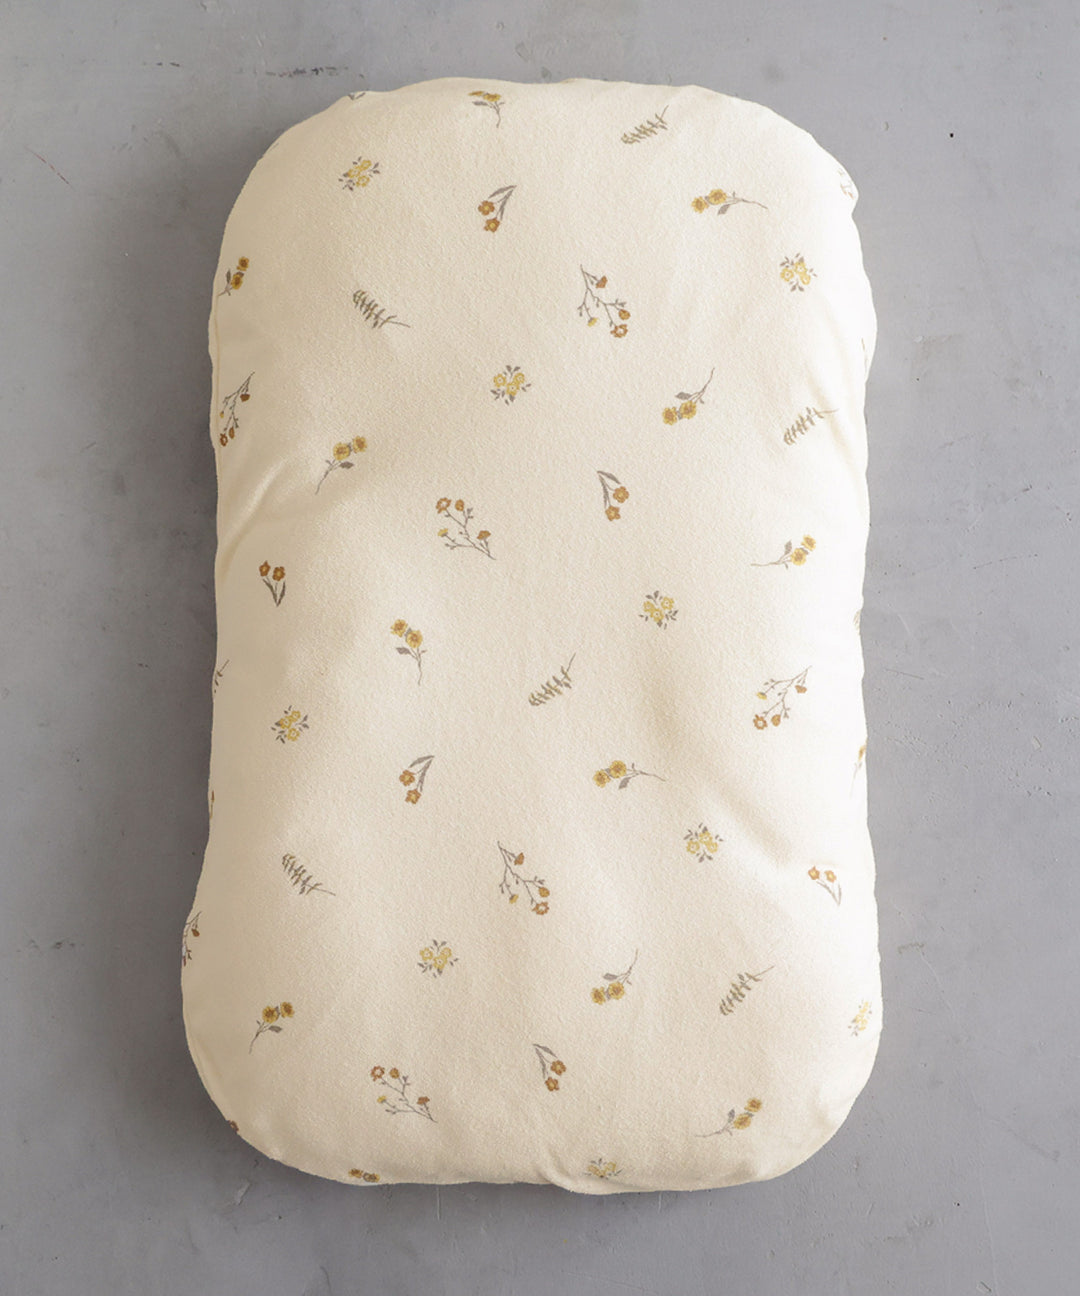 Baby Lounger Pillow (Pile fabric)